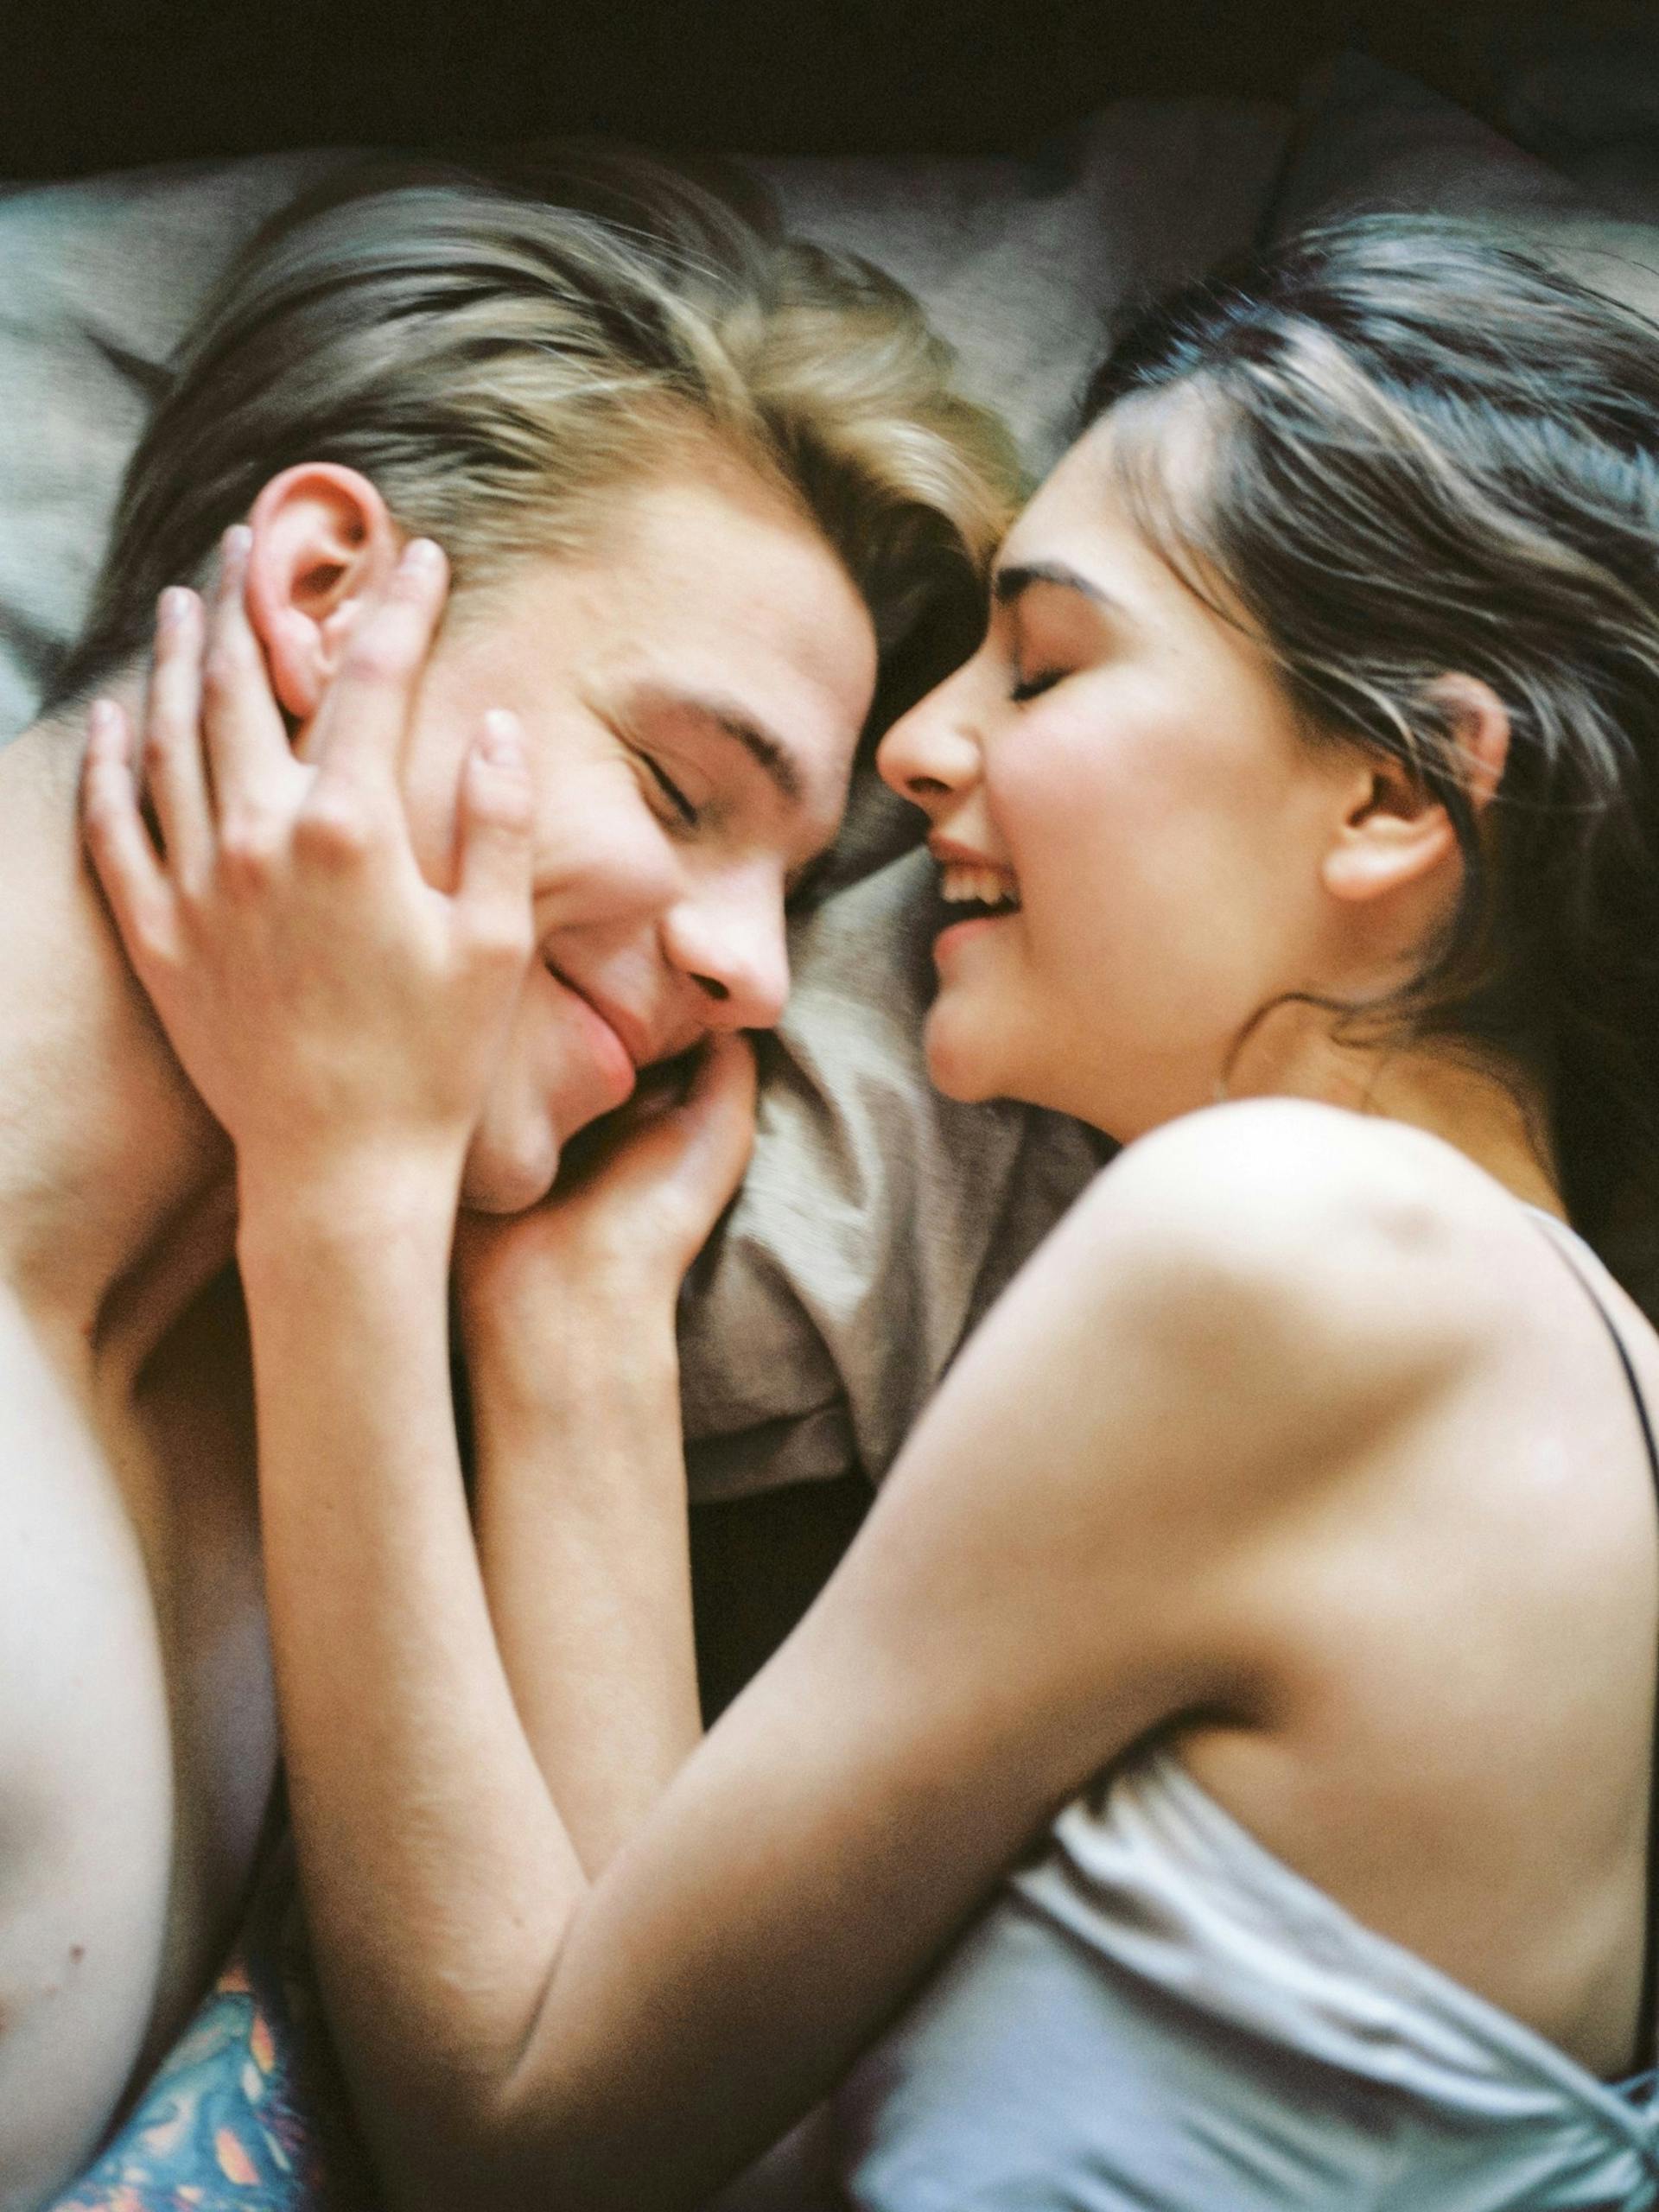 A happy couple lying in bed together | Source: Pexels